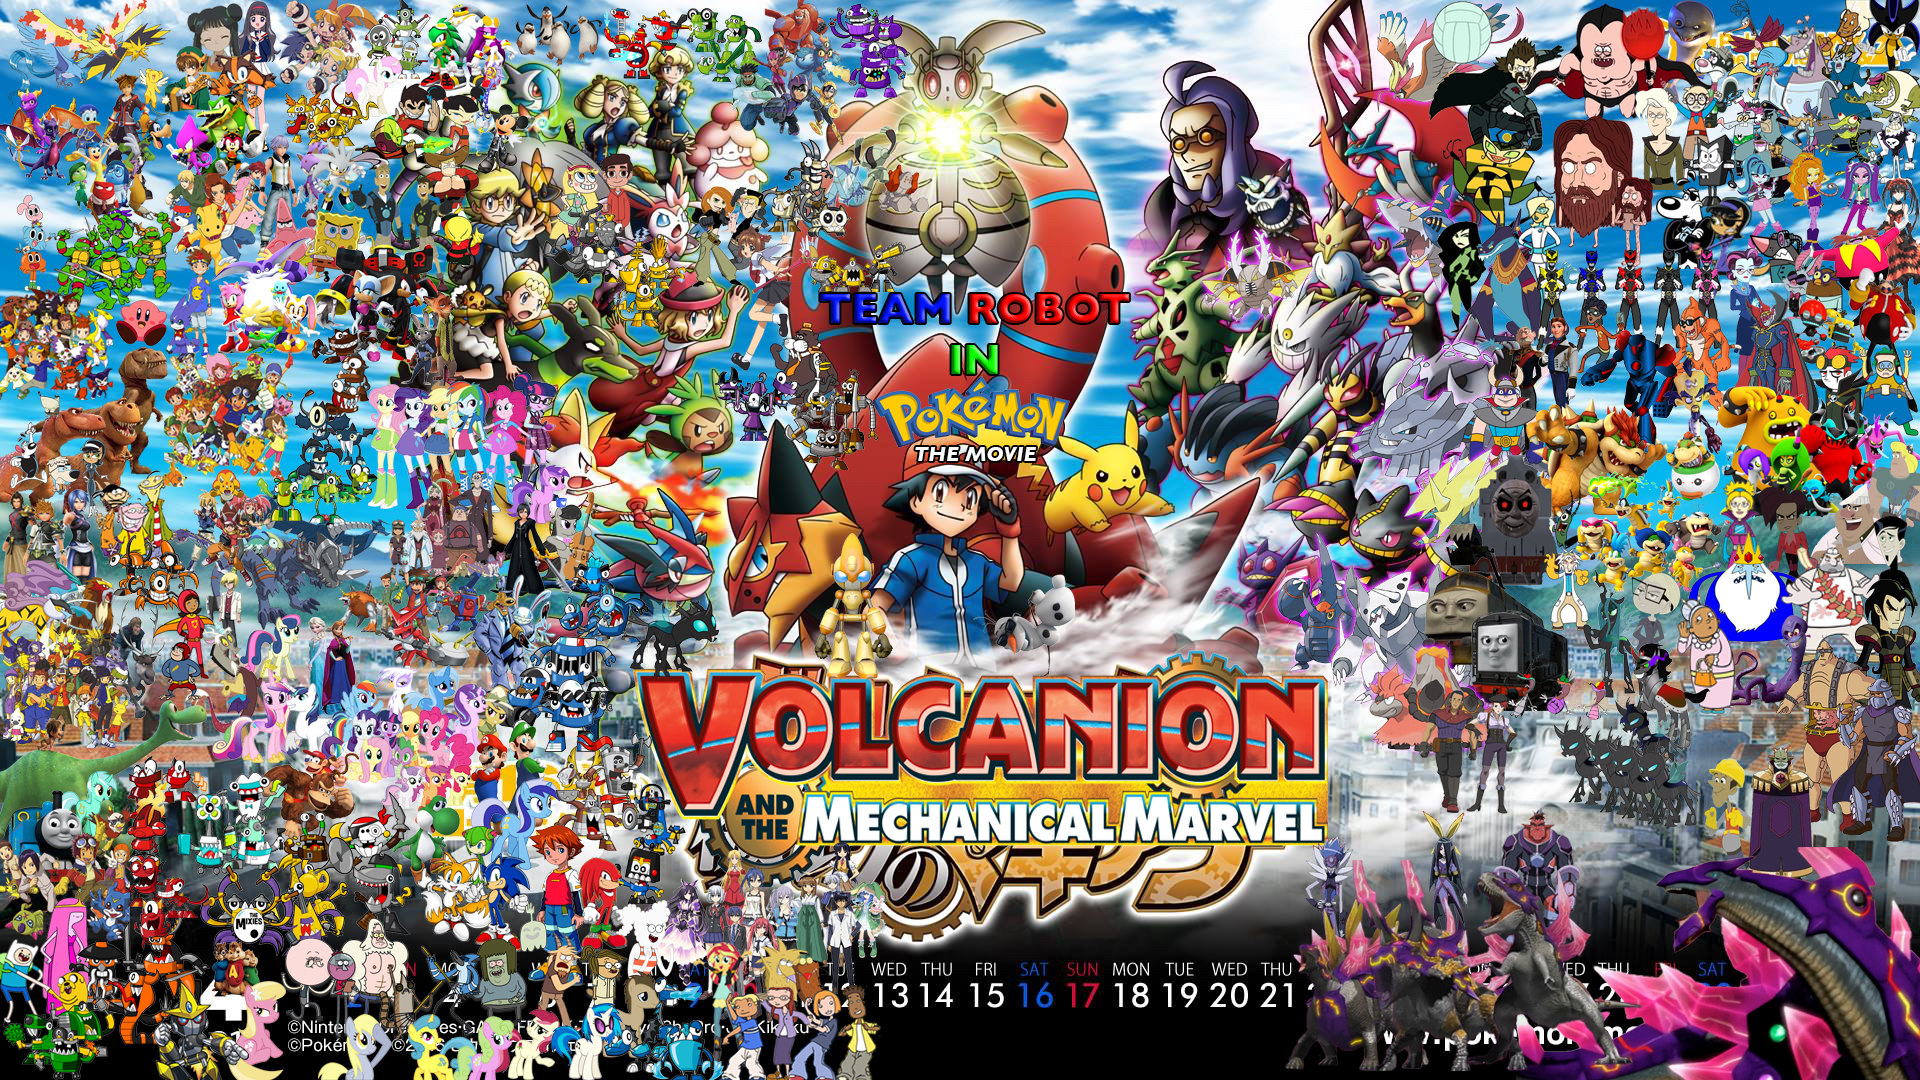 UK Anime Network - Manga Entertainment to release Pokemon The Movie:  Volcanion and the Mechanical Marvel this May